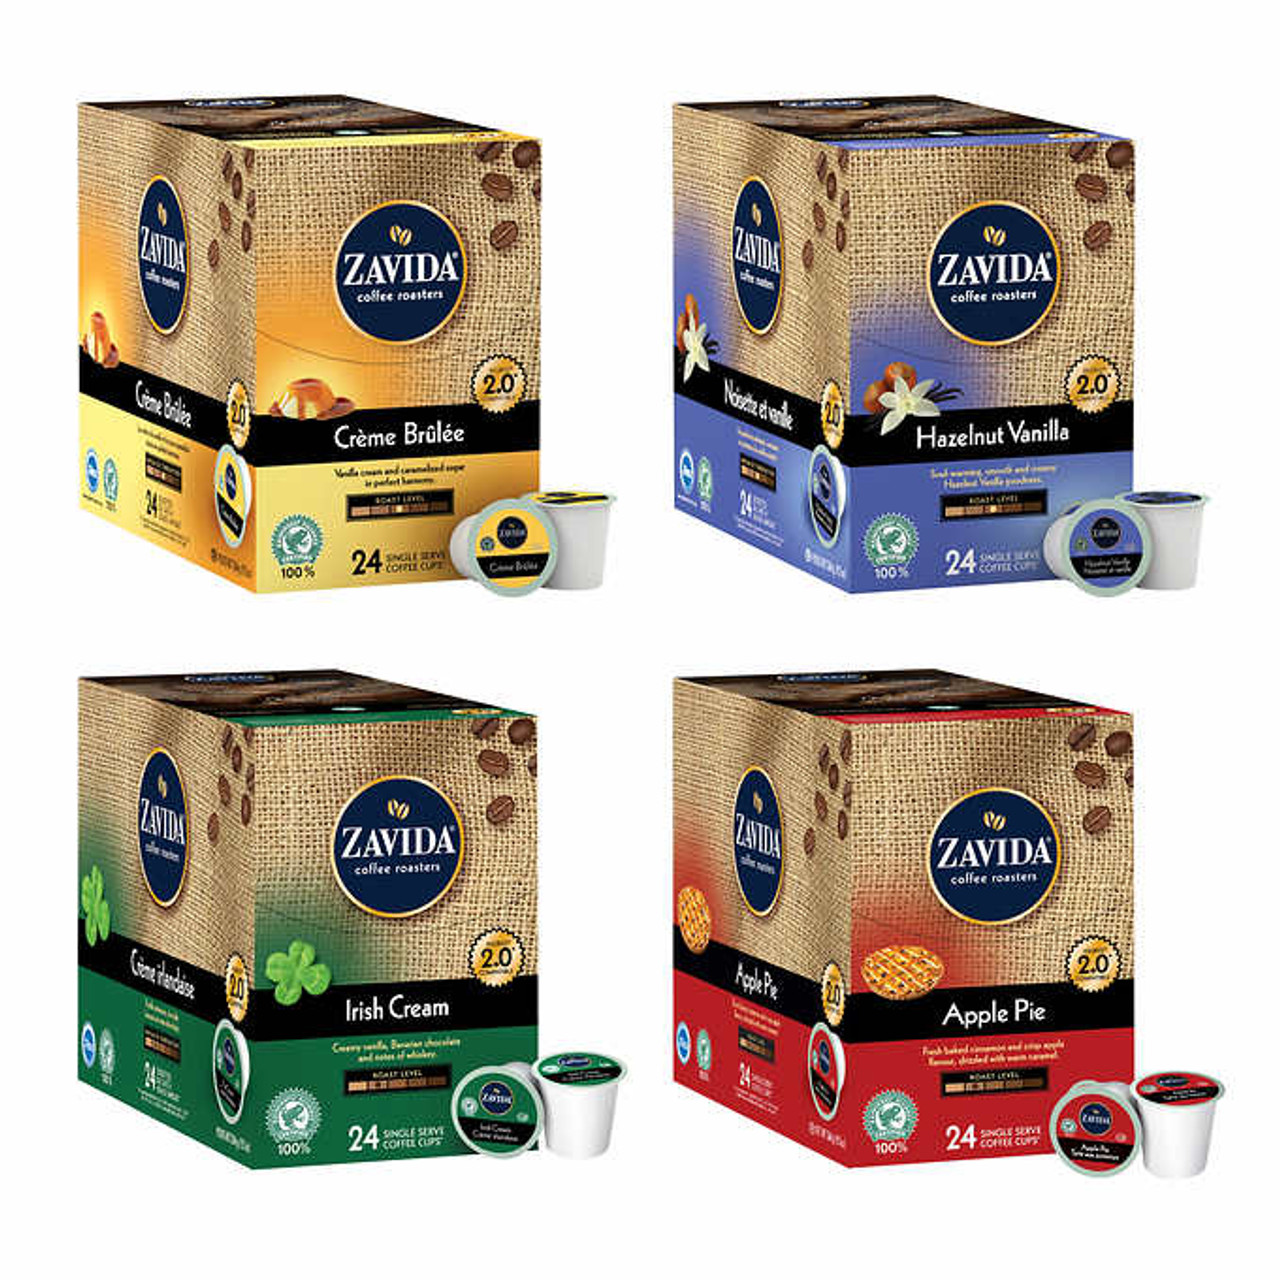 Zavida Single-Serve Coffee Holiday Variety Pack - 96-Count - Festive Flavors for Joyful Sipping- Chicken Pieces